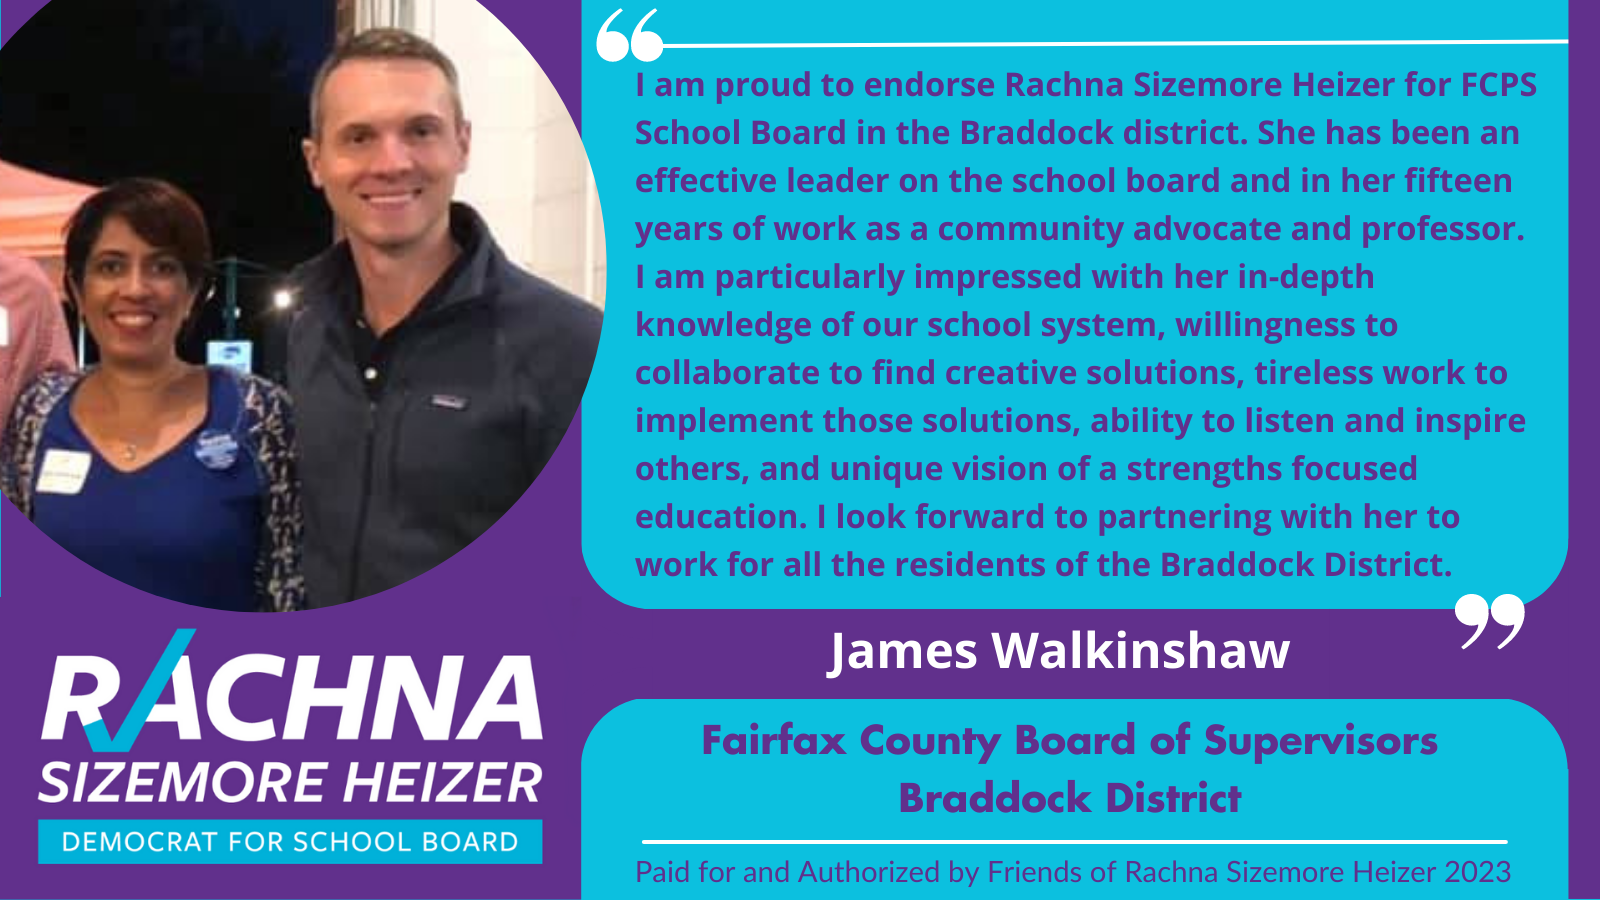  Endorsement from Supervisor James Walkinshaw, Braddock District. Endorsement is “I am proud to endorse Rachna SIzemore Heizer for FCPS School Board in the Braddock District. She has been an effective leader on the school board and in her fifteen yea